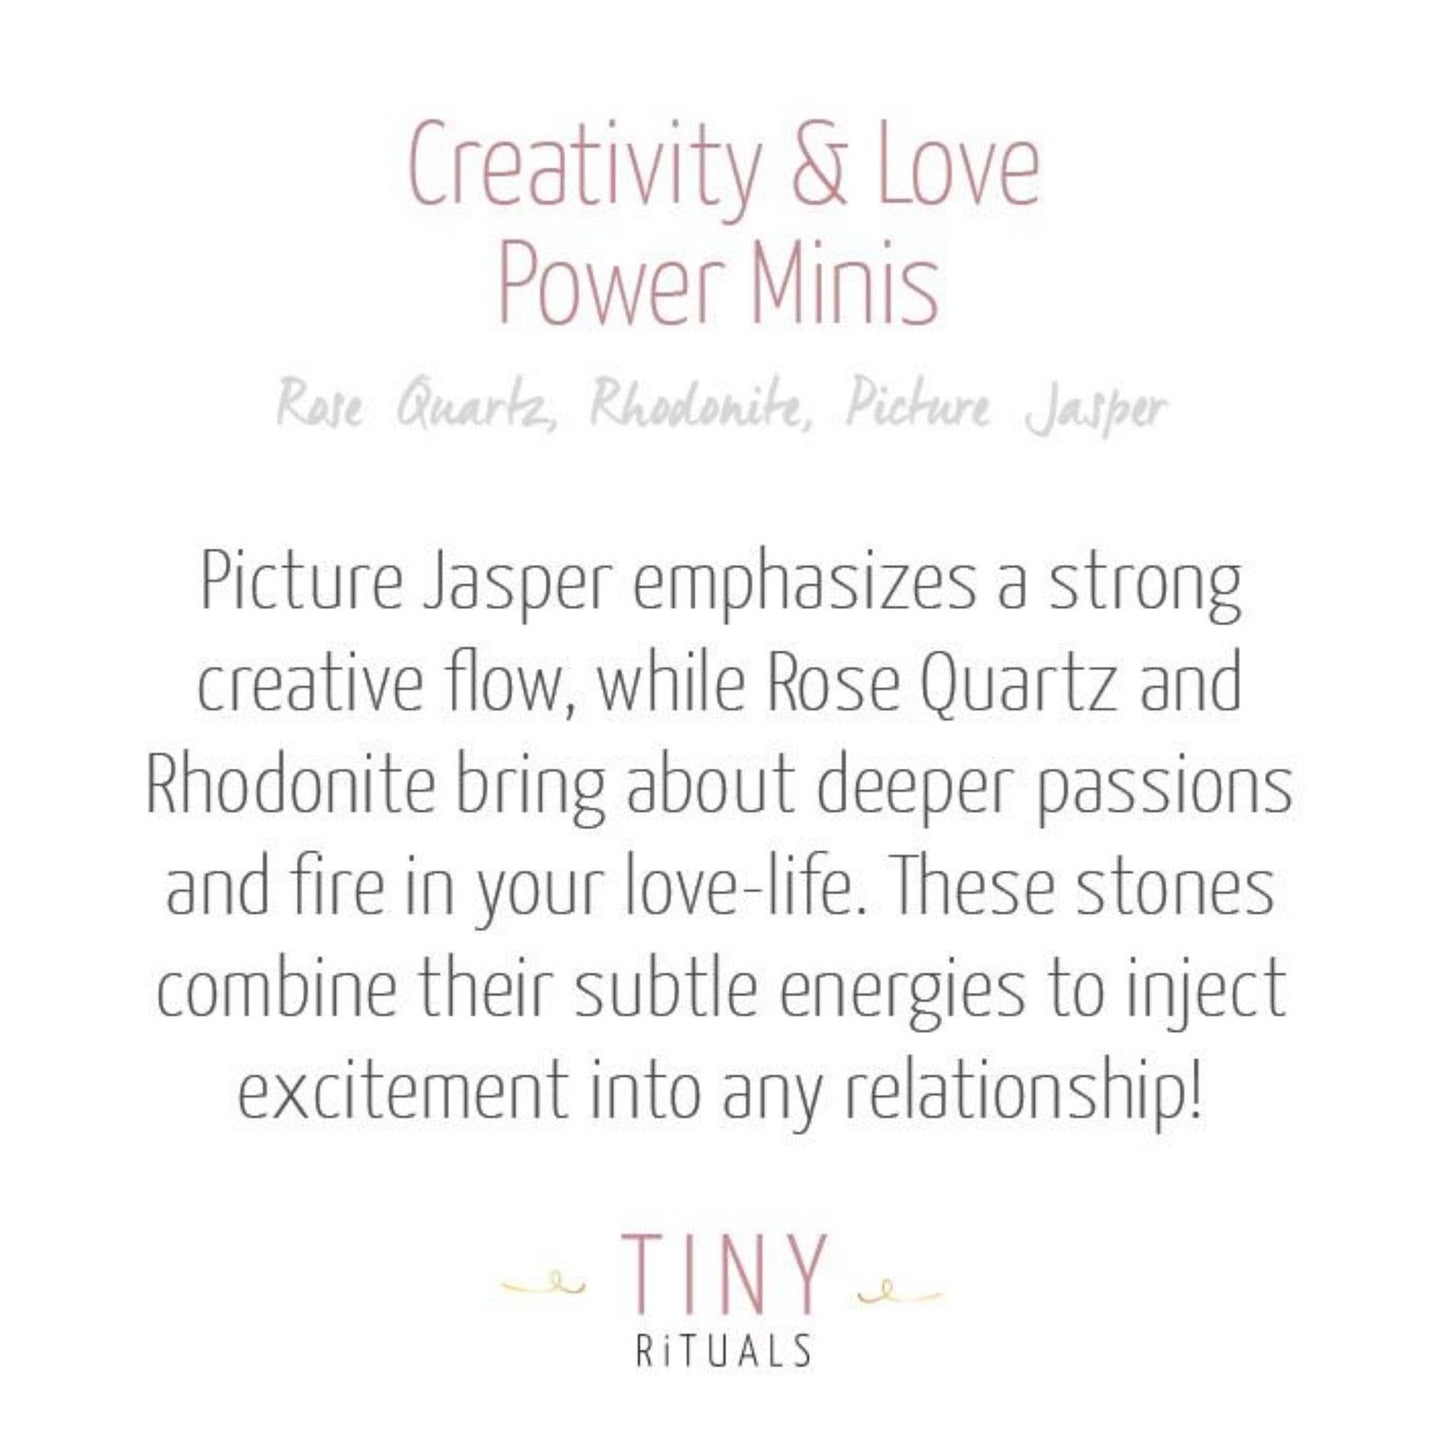 Creativity & Love Pack by Tiny Rituals